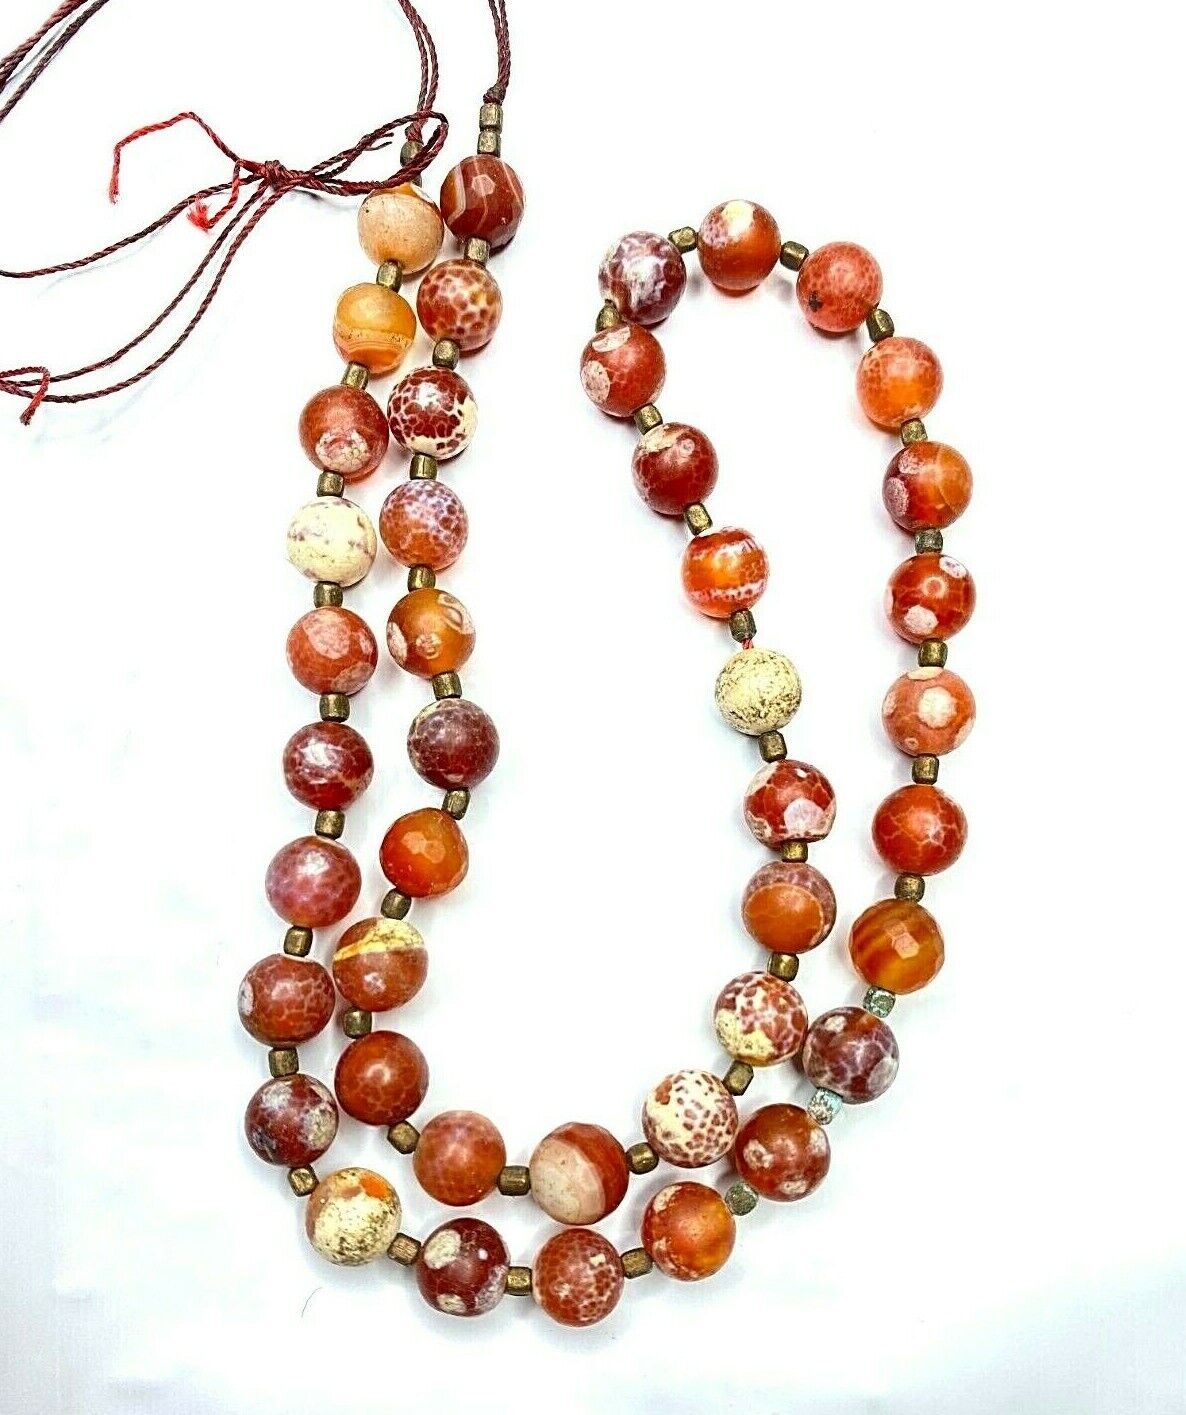 Antique Old Ancient Indo-Tibetan Carnelian Agate Beads Necklace Mala